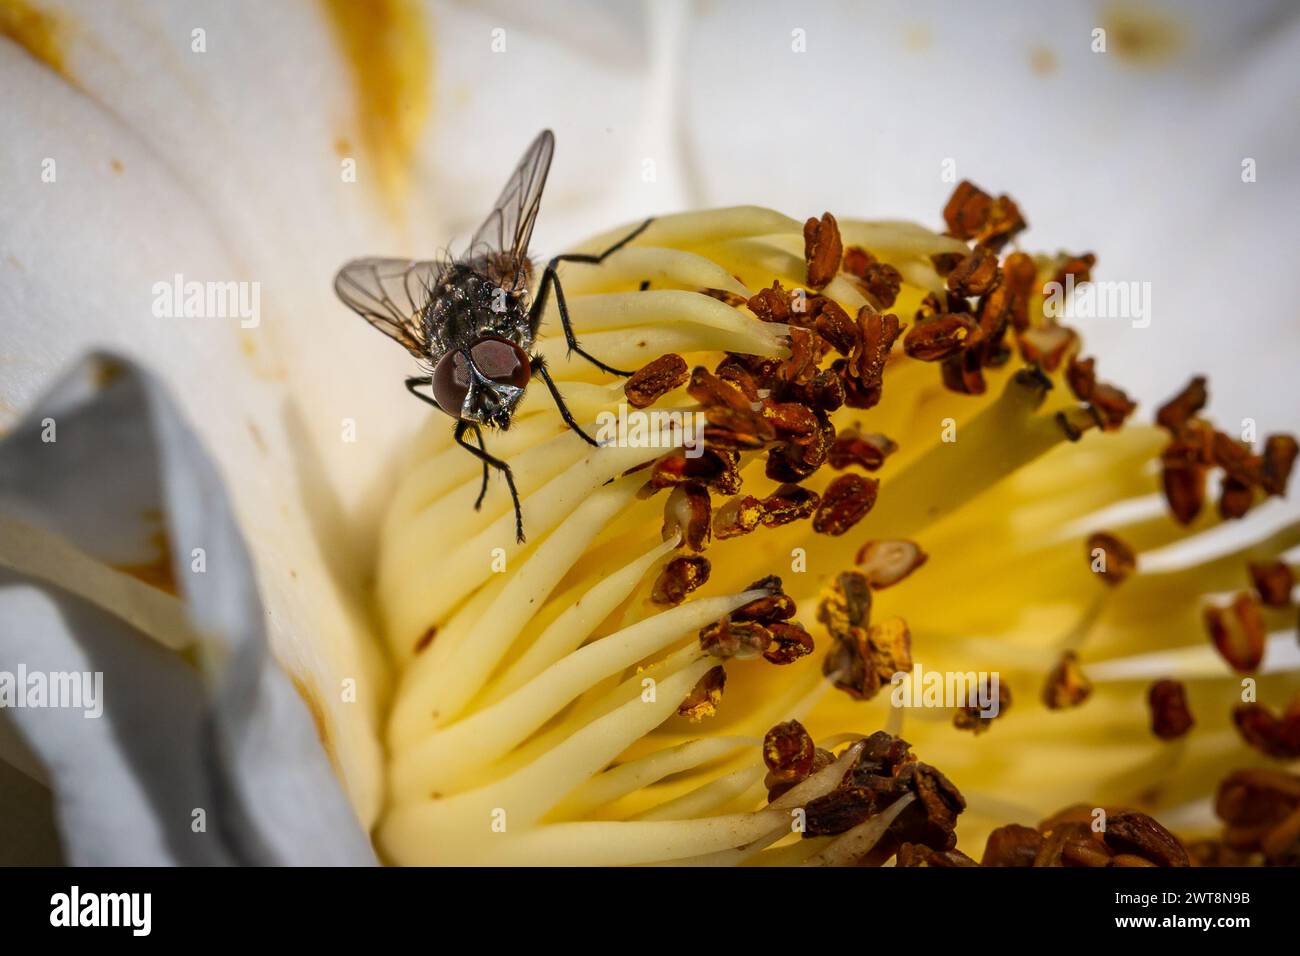 A macro photograph of a fly on flower stamen Stock Photo